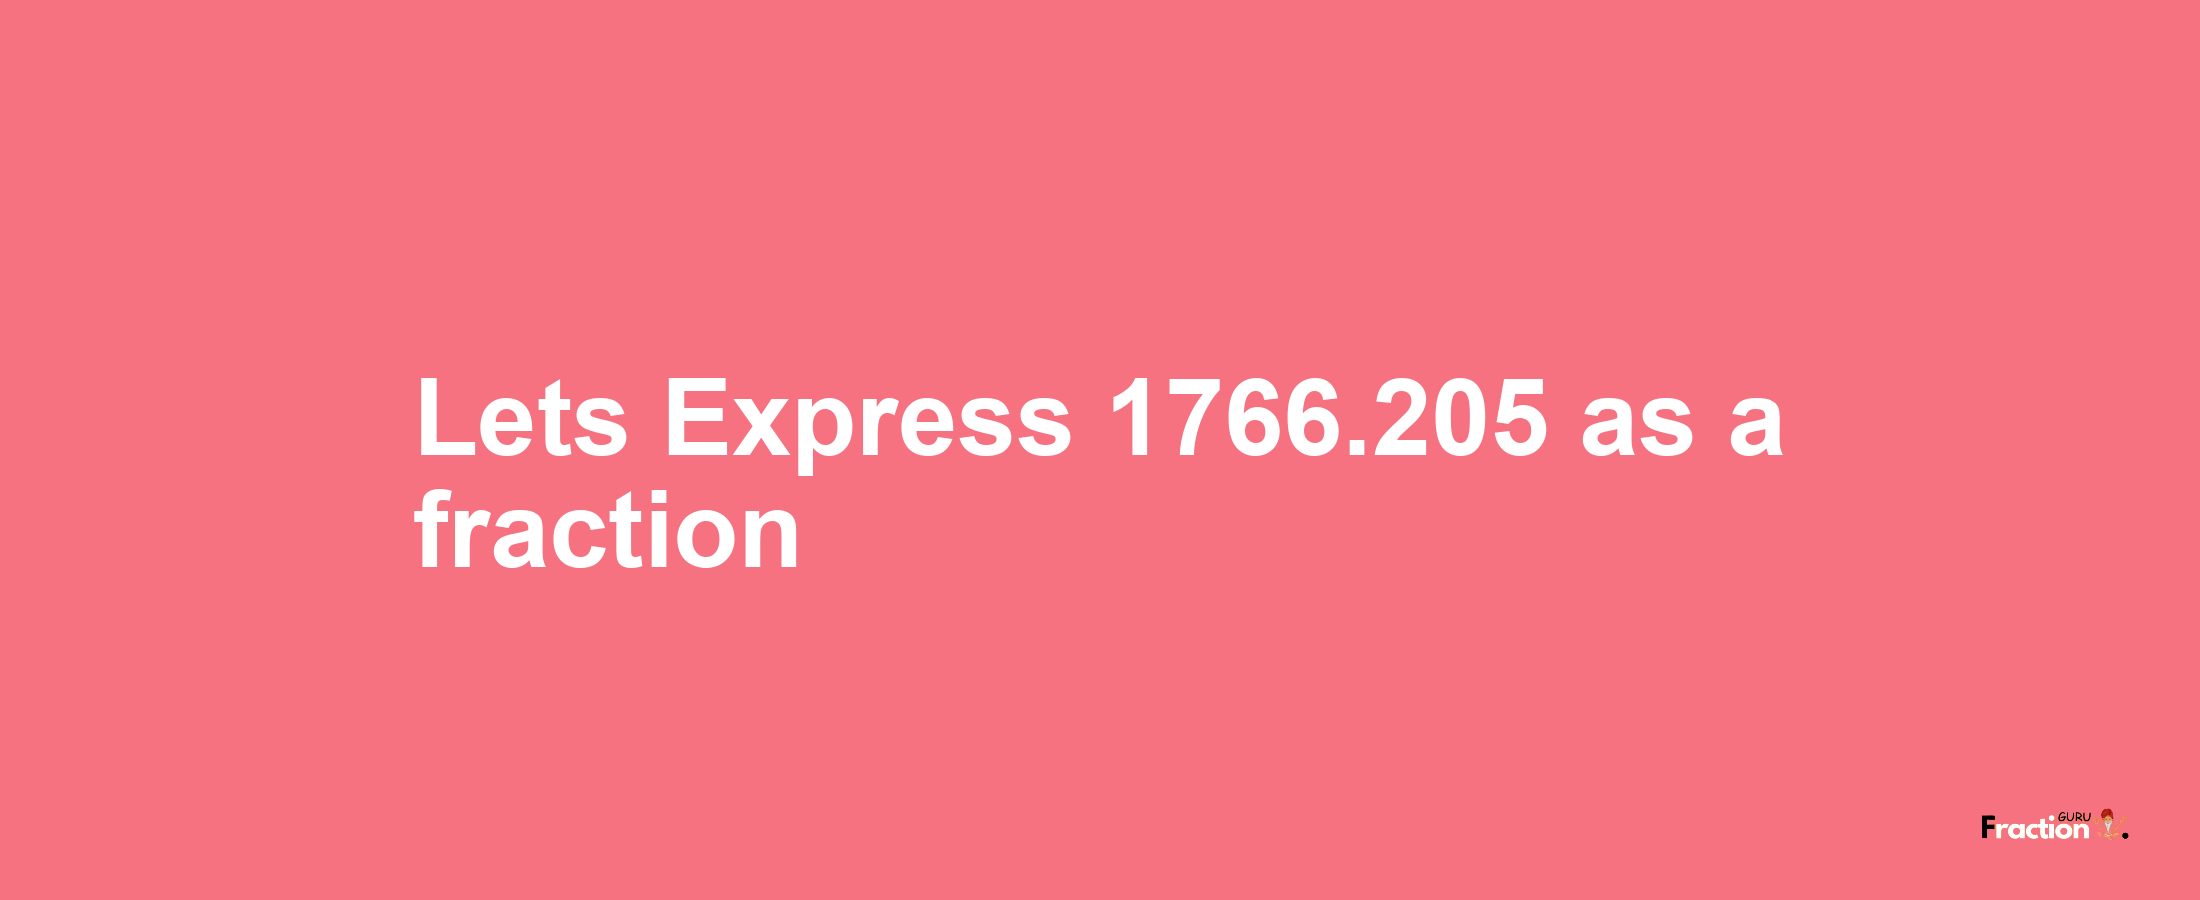 Lets Express 1766.205 as afraction